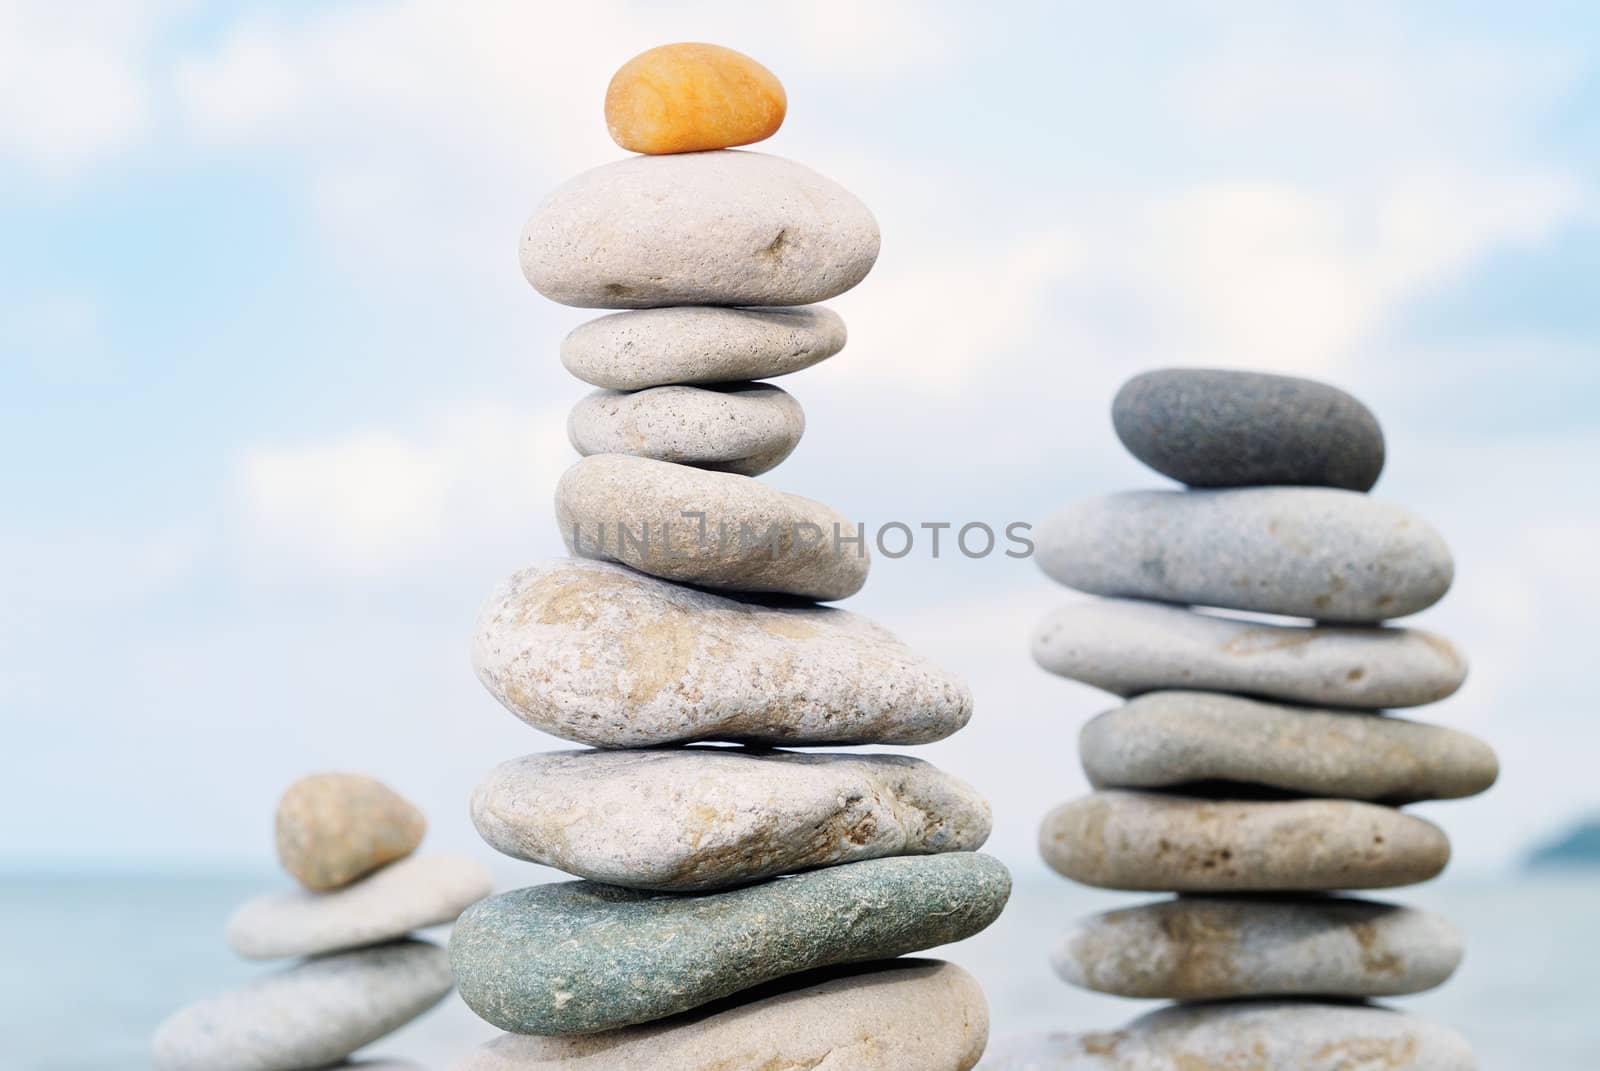 Three stone tower built of colored pebbles